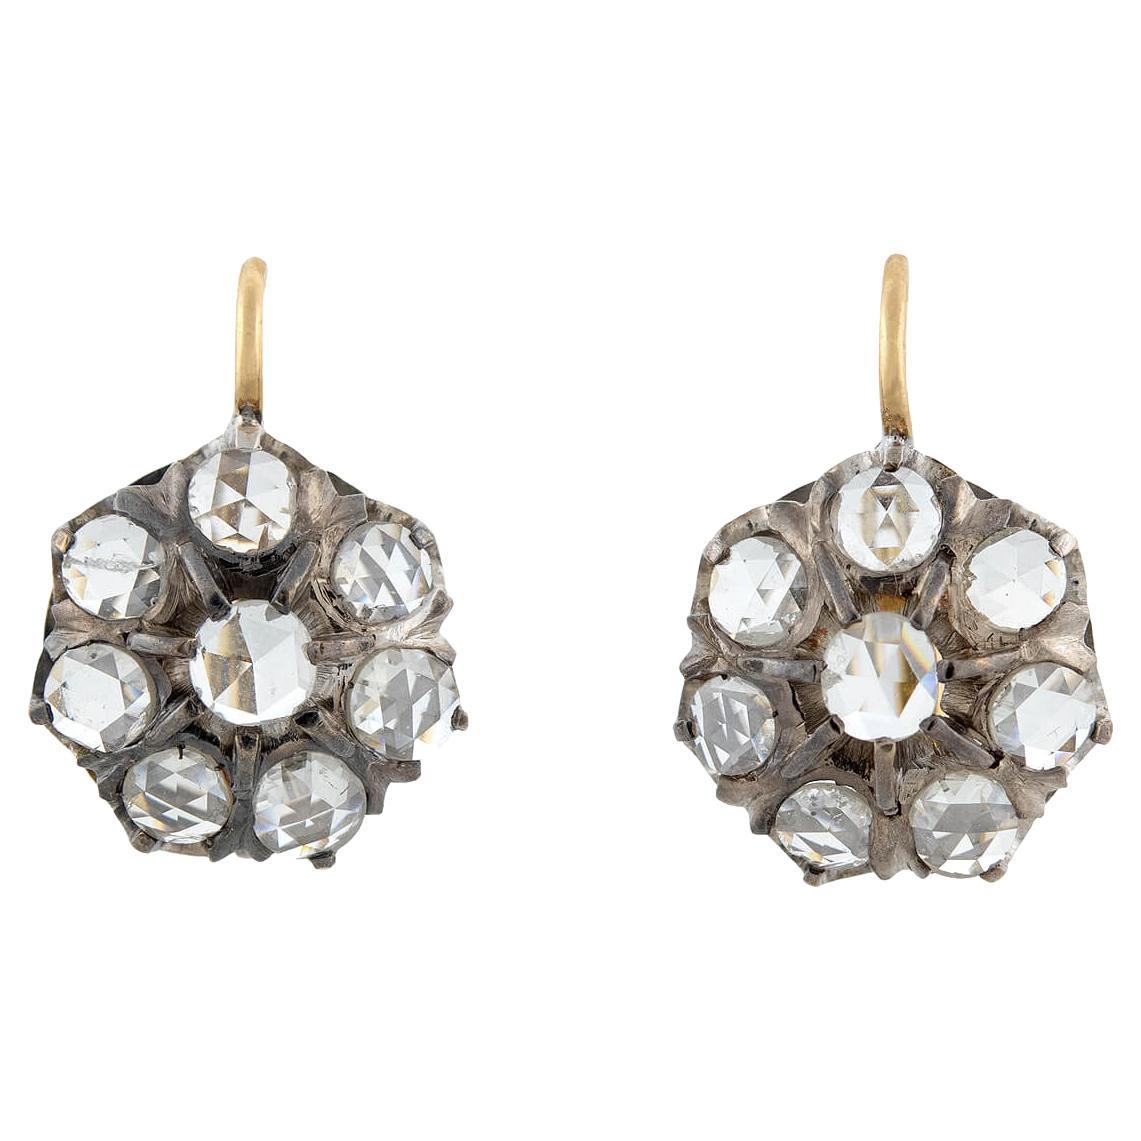 Victorian Holland Rose Cut Diamond Cluster Earrings 3ctw For Sale